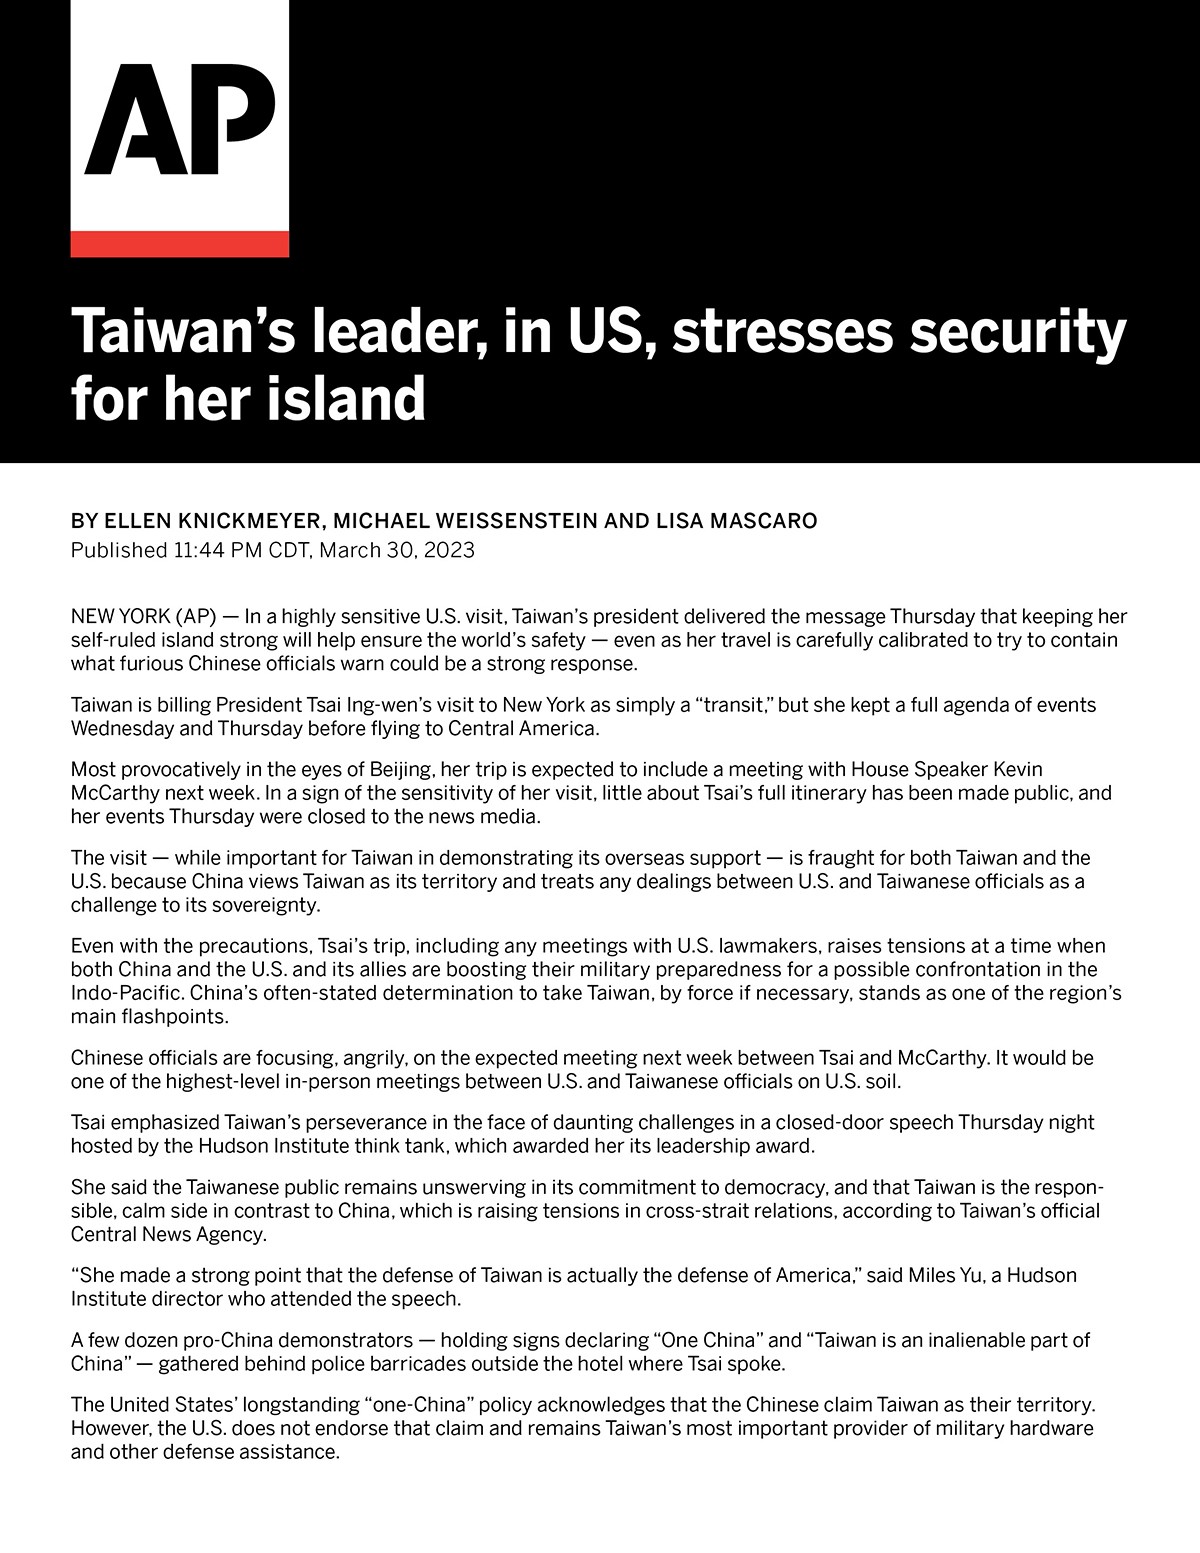 Taiwan's leader, in US, stresses security for her island